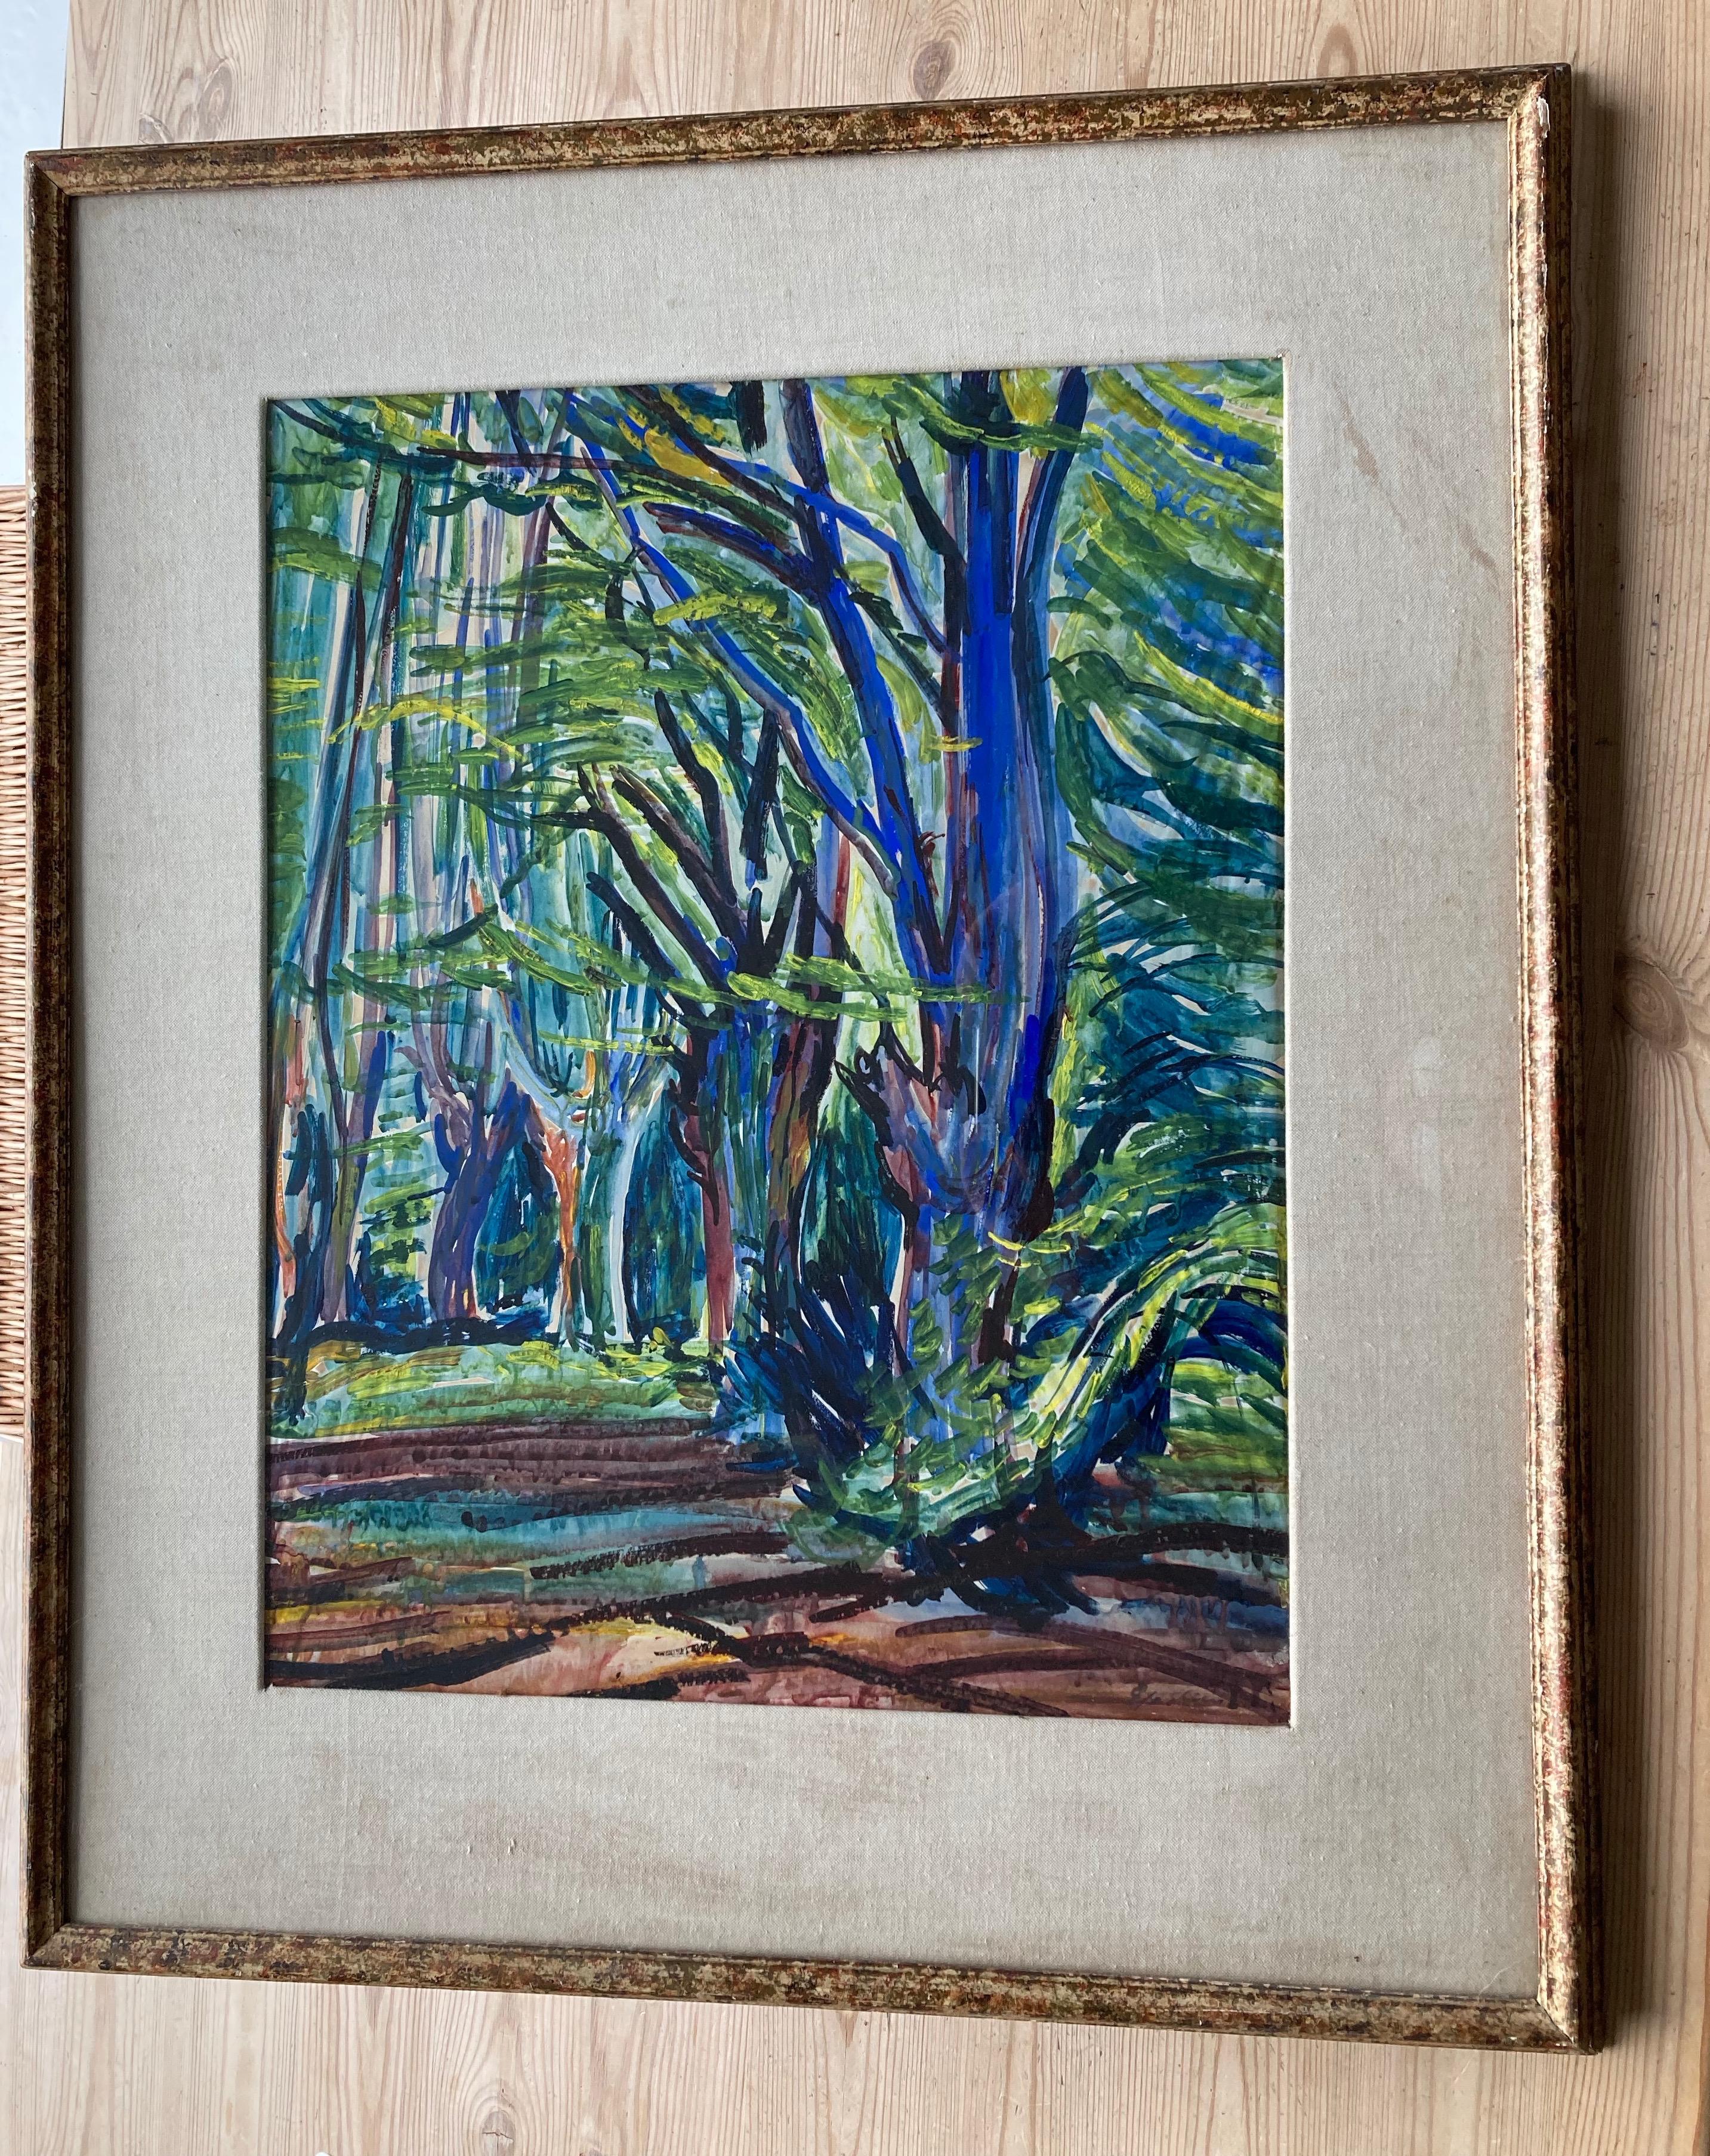 Sir Jacob Epstein (1880-1959)
Near Baldwyns Hill
Signed
Watercolour and touches of gouache
22 x 17 inches
​
Exhibited: No. 4, as title, from the Epping Forest Series at Arthur Tooth and Sons, 1933 

Provenance: Bought from the above exhibition by